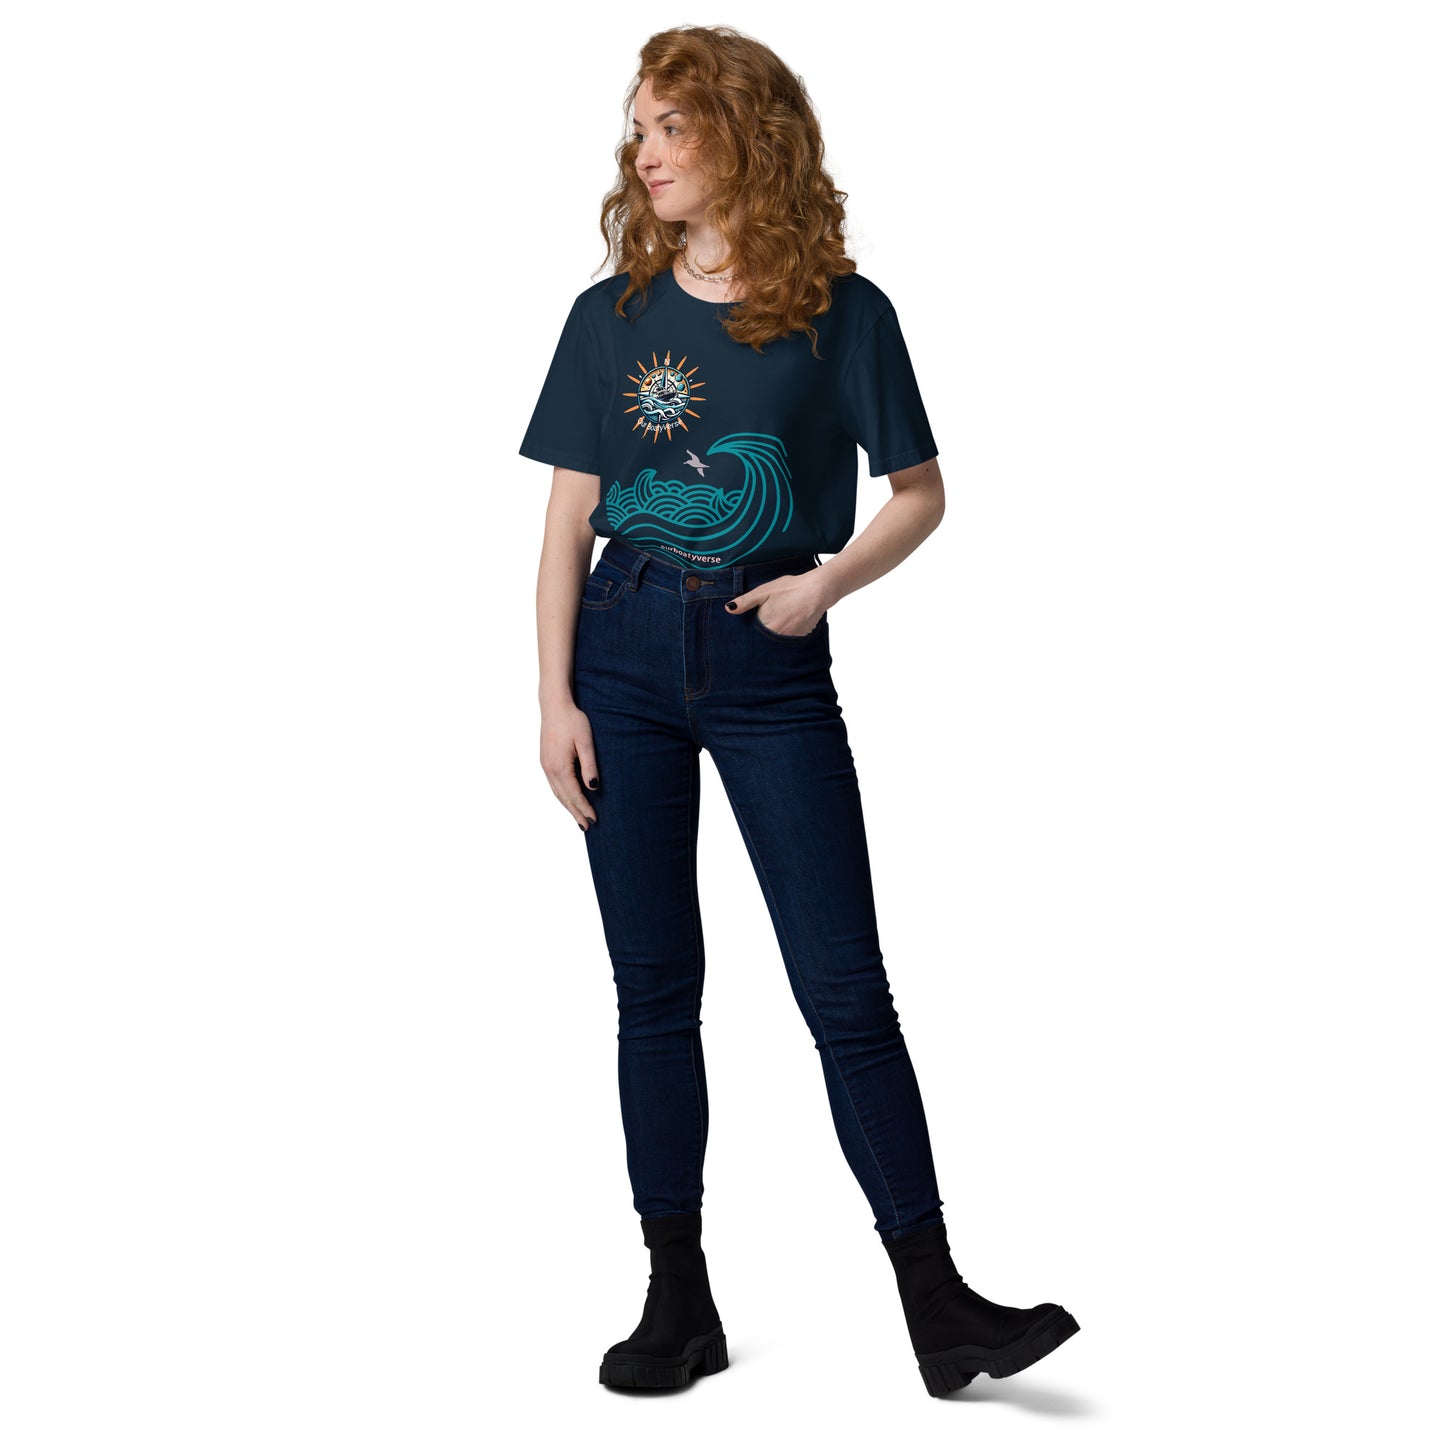 Women's Sun, Sea and Waves Organic, Eco Friendly cotton T-shirt by Our BoatyVerse